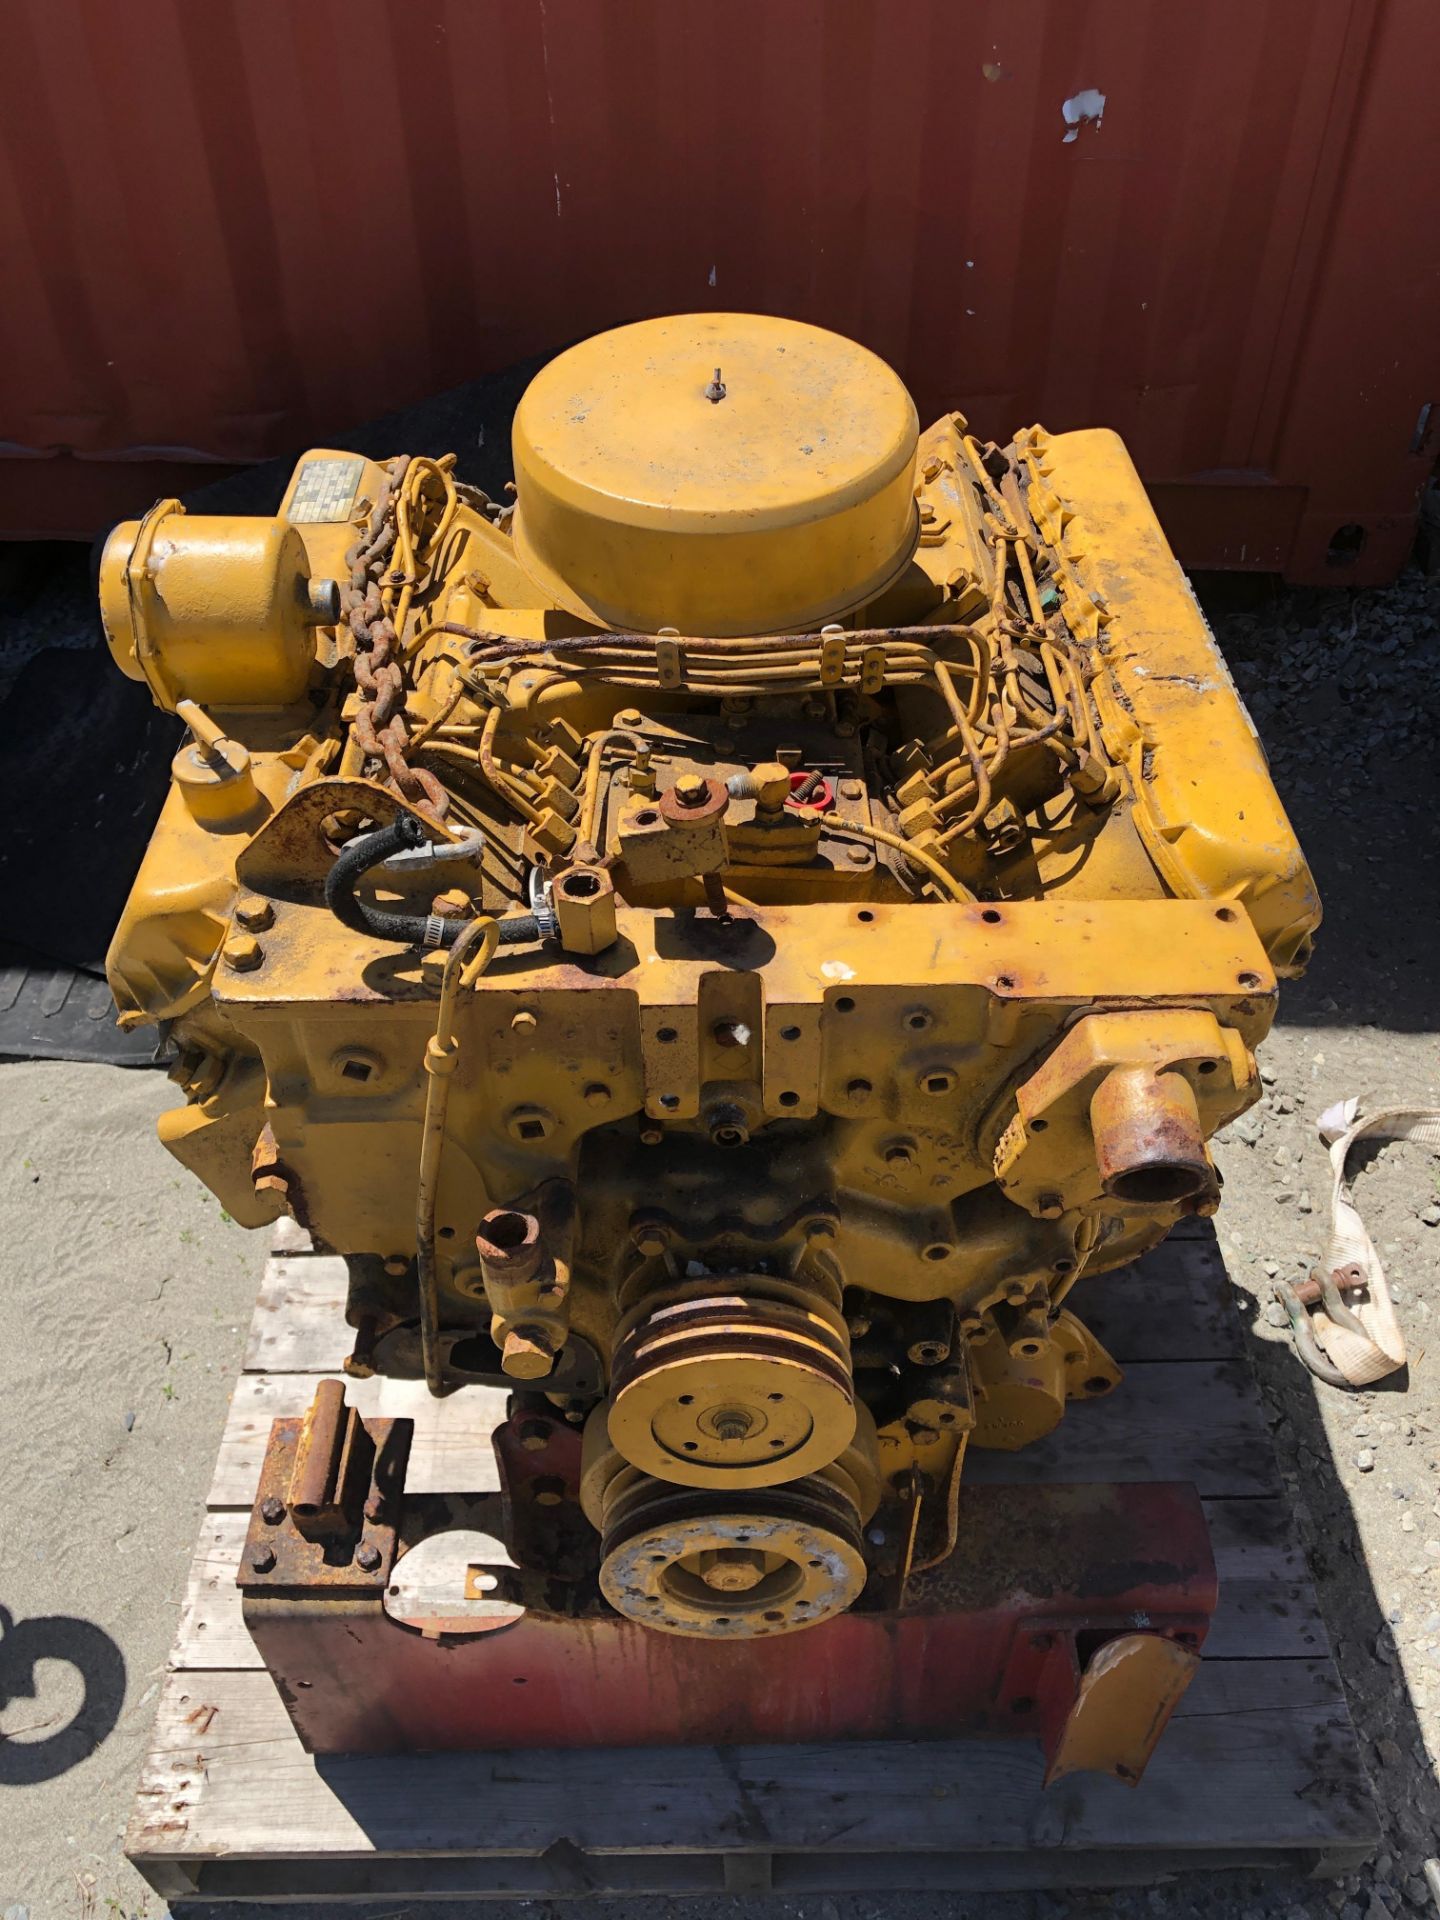 (2) Caterpillar #3208 8 Cylinder, 141 HP, Diesel Motors. ID#: PL492686 (1 Working & 1 For Parts)